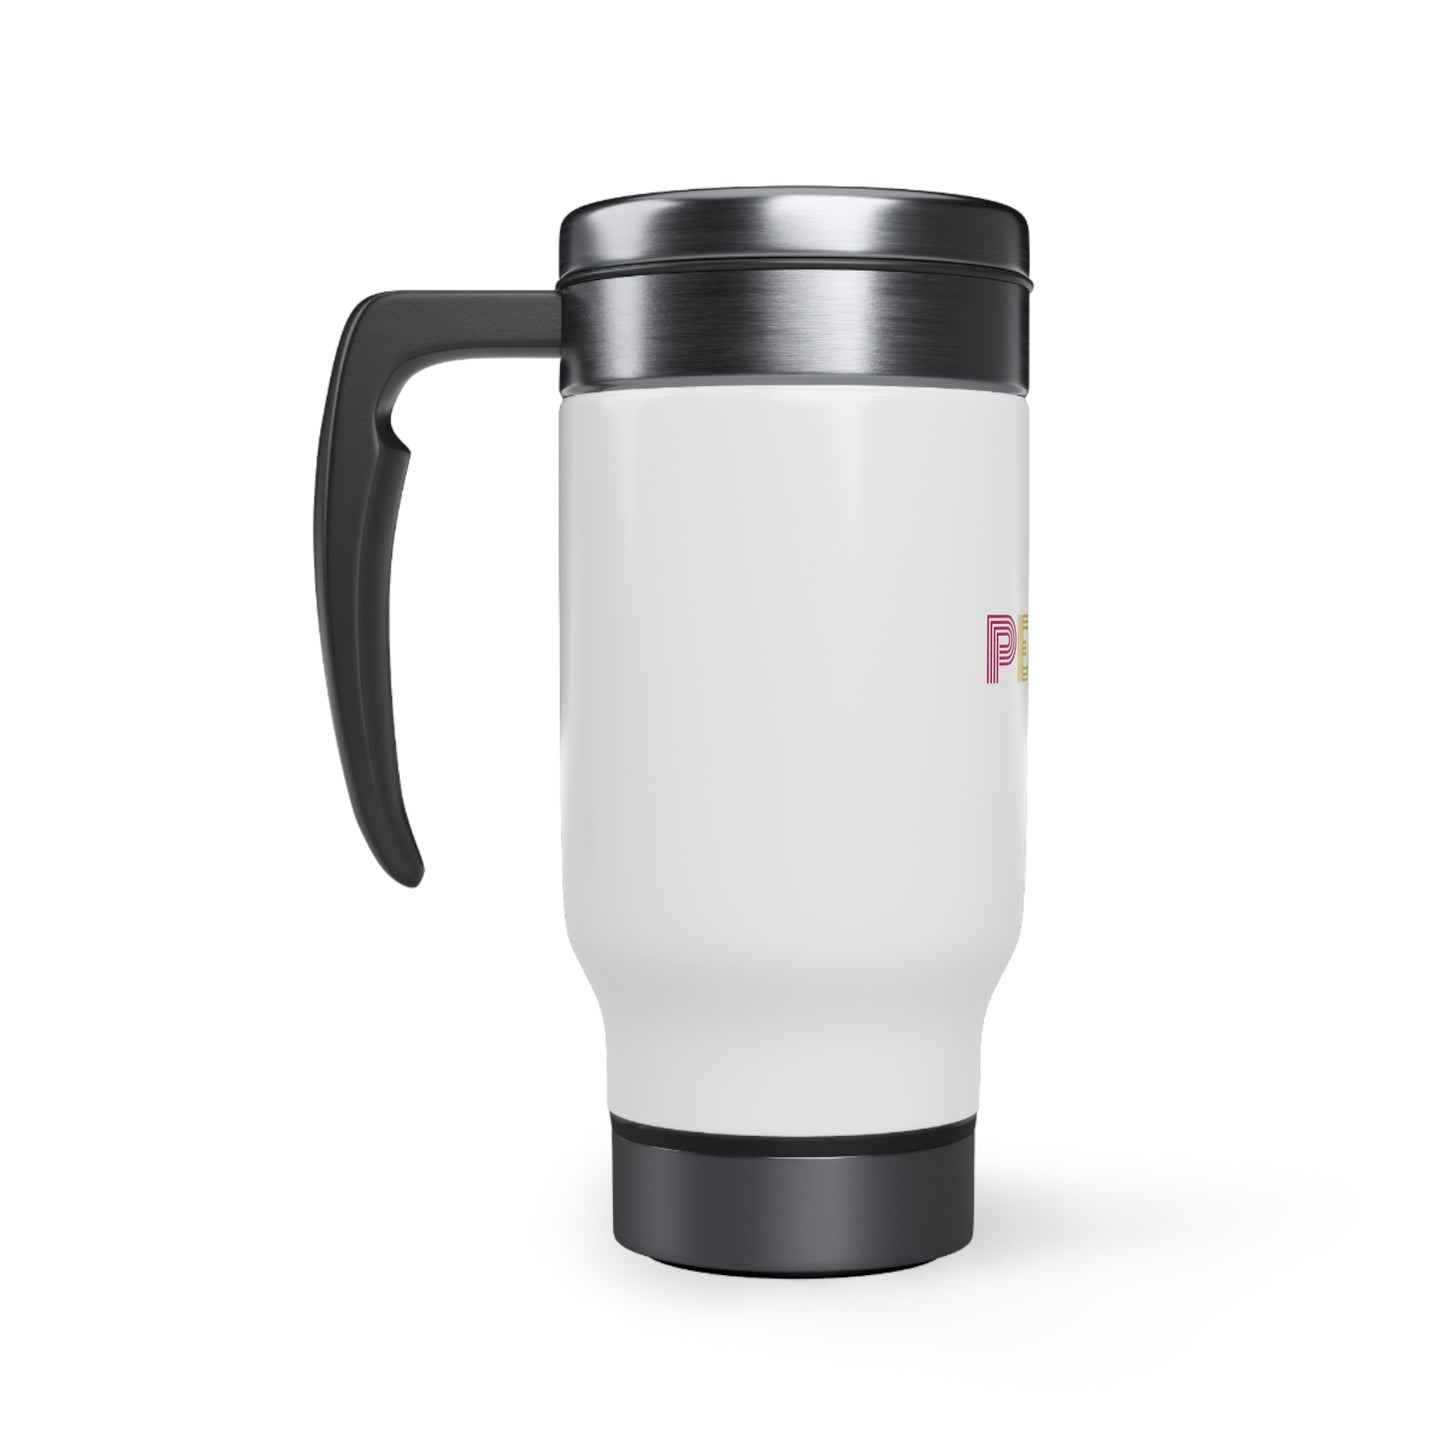 PEACE Stainless Steel Travel Mug with Handle, 14oz